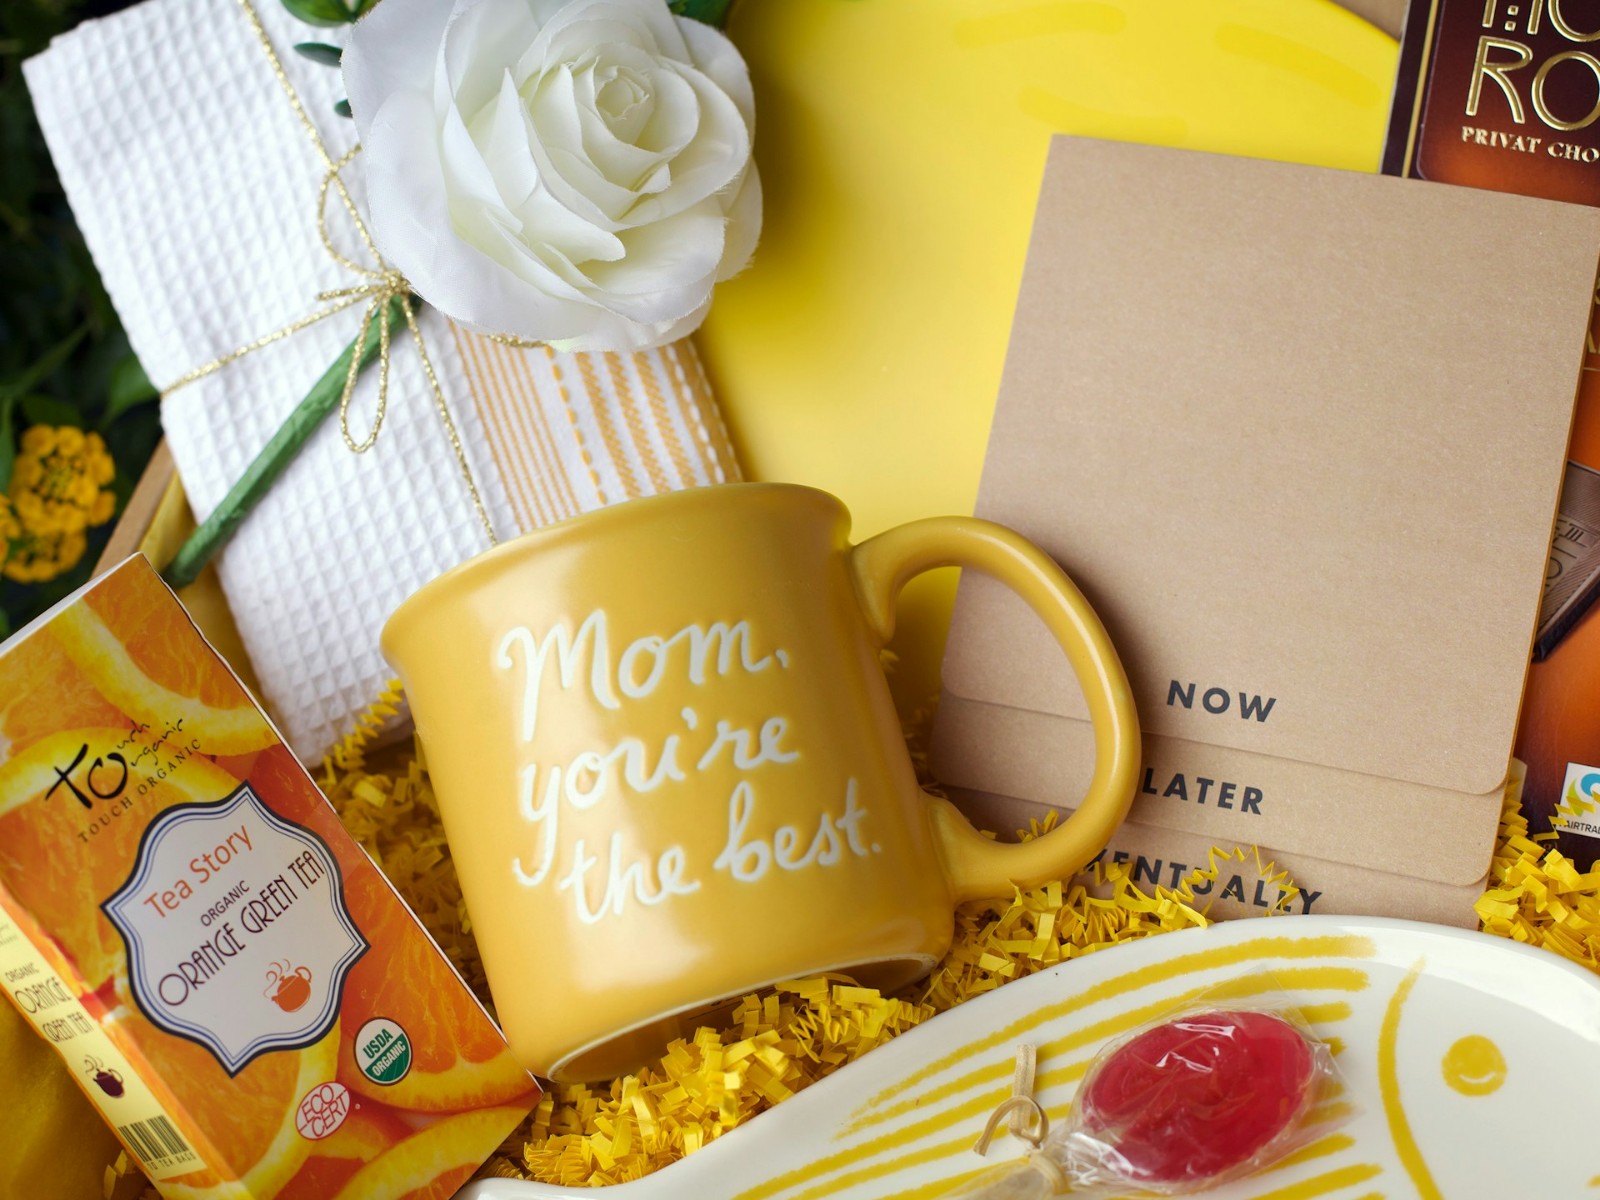 A basket filled with a yellow mug, chocolate, a white rose, and other little gifts.